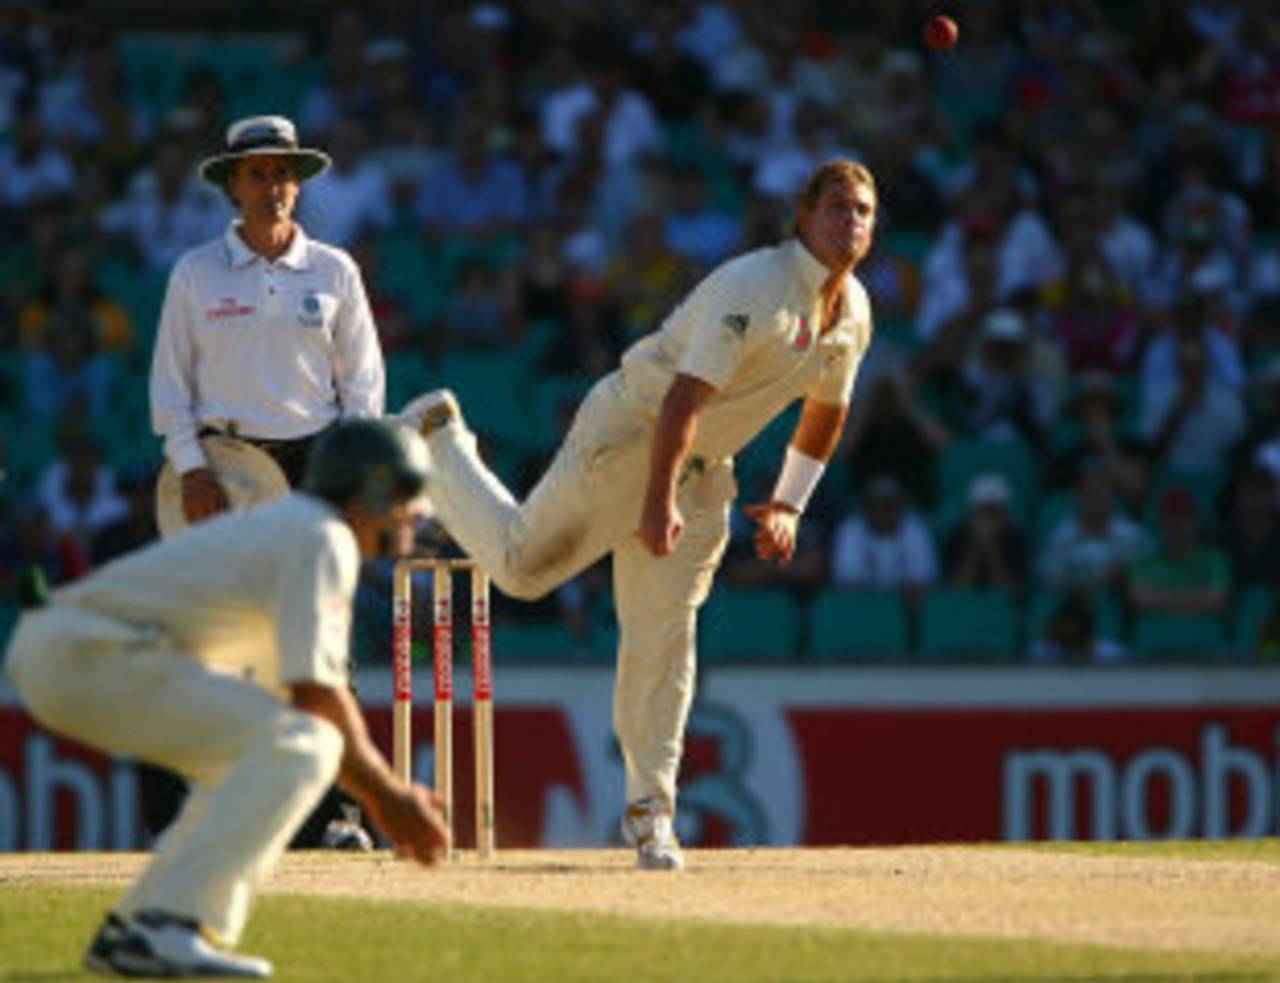 No one has taken as many wickets in Test wins, or in Ashes contests, as Shane Warne&nbsp;&nbsp;&bull;&nbsp;&nbsp;Getty Images